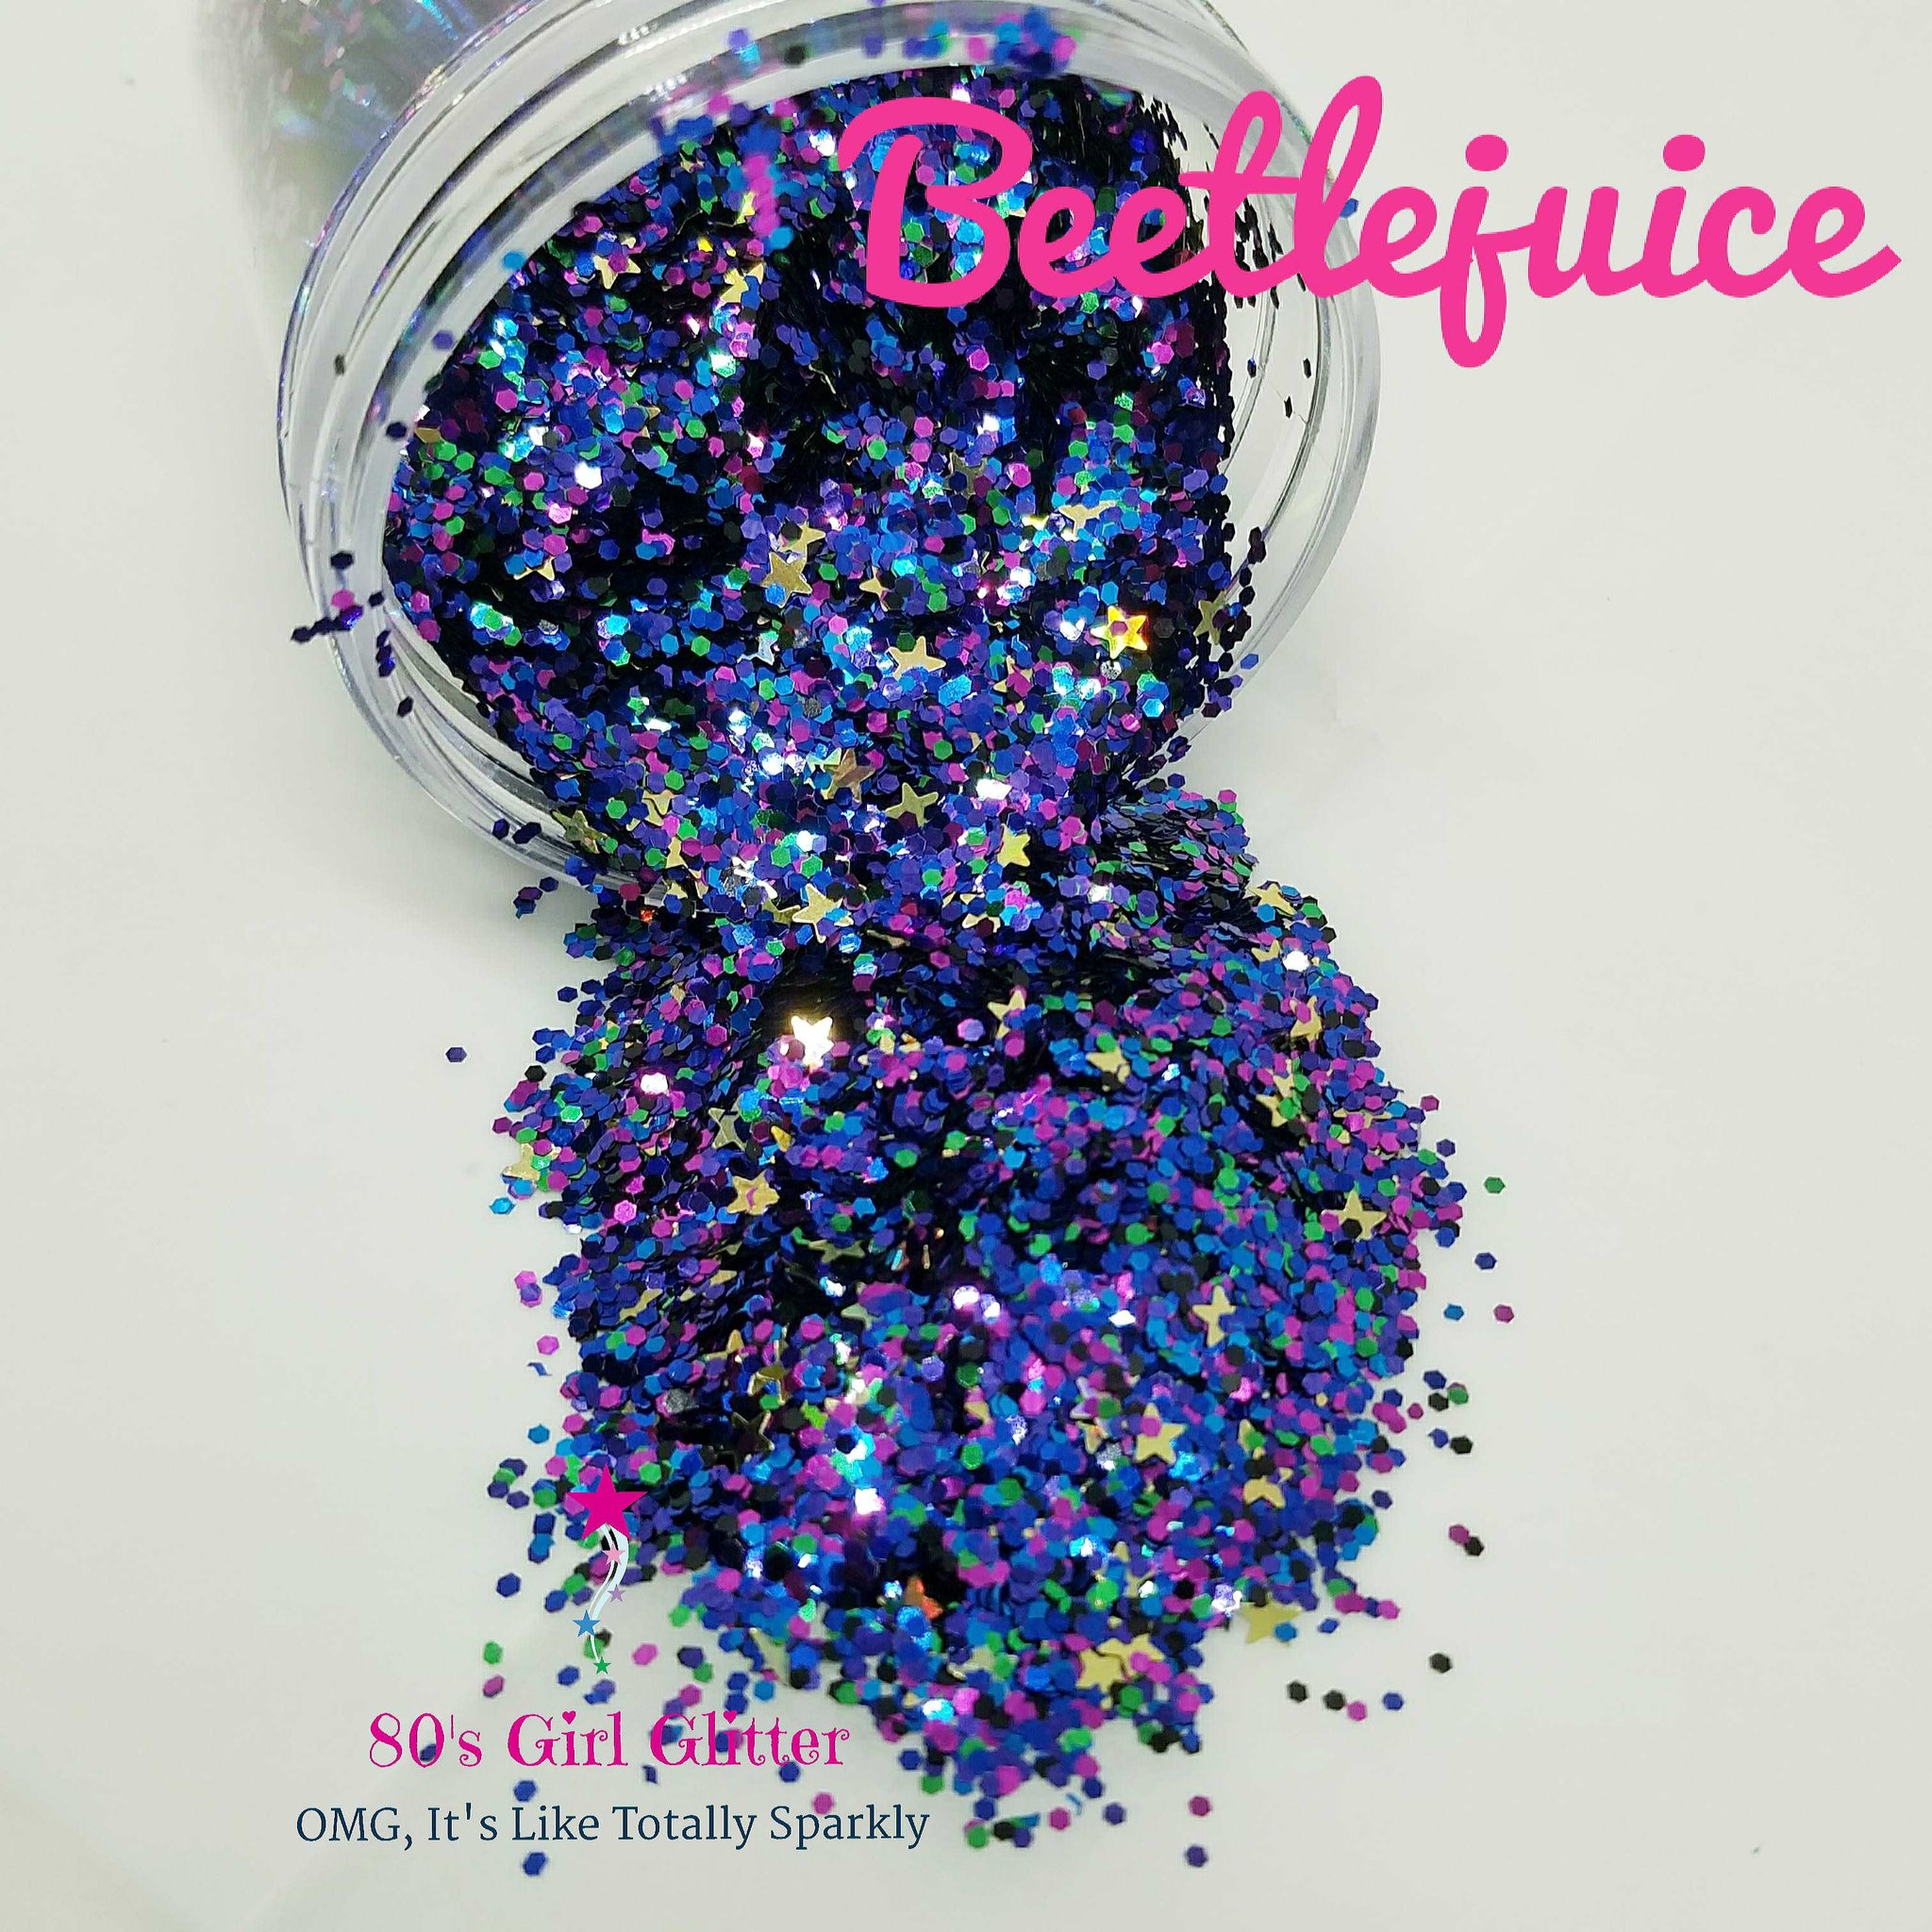 Beetlejuice - Glitter - Purple Fine Glitter Mix with Holographic